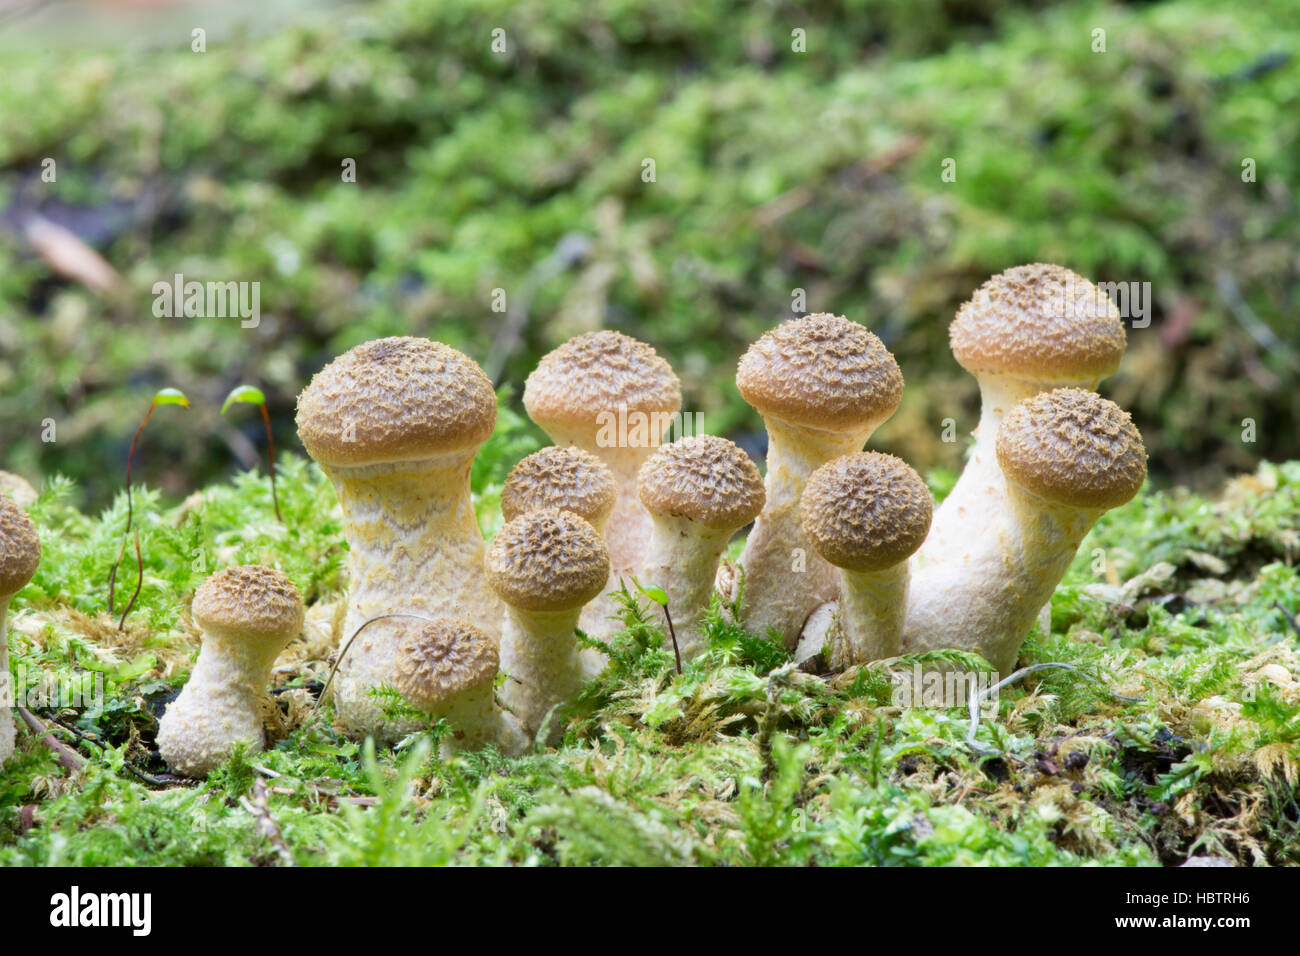 Honey Fungus or Boot-lace Fungus, Probably Armillaria gallica due to bulbous stem  New. fruitbody emerging, Sussex, UK. October Stock Photo